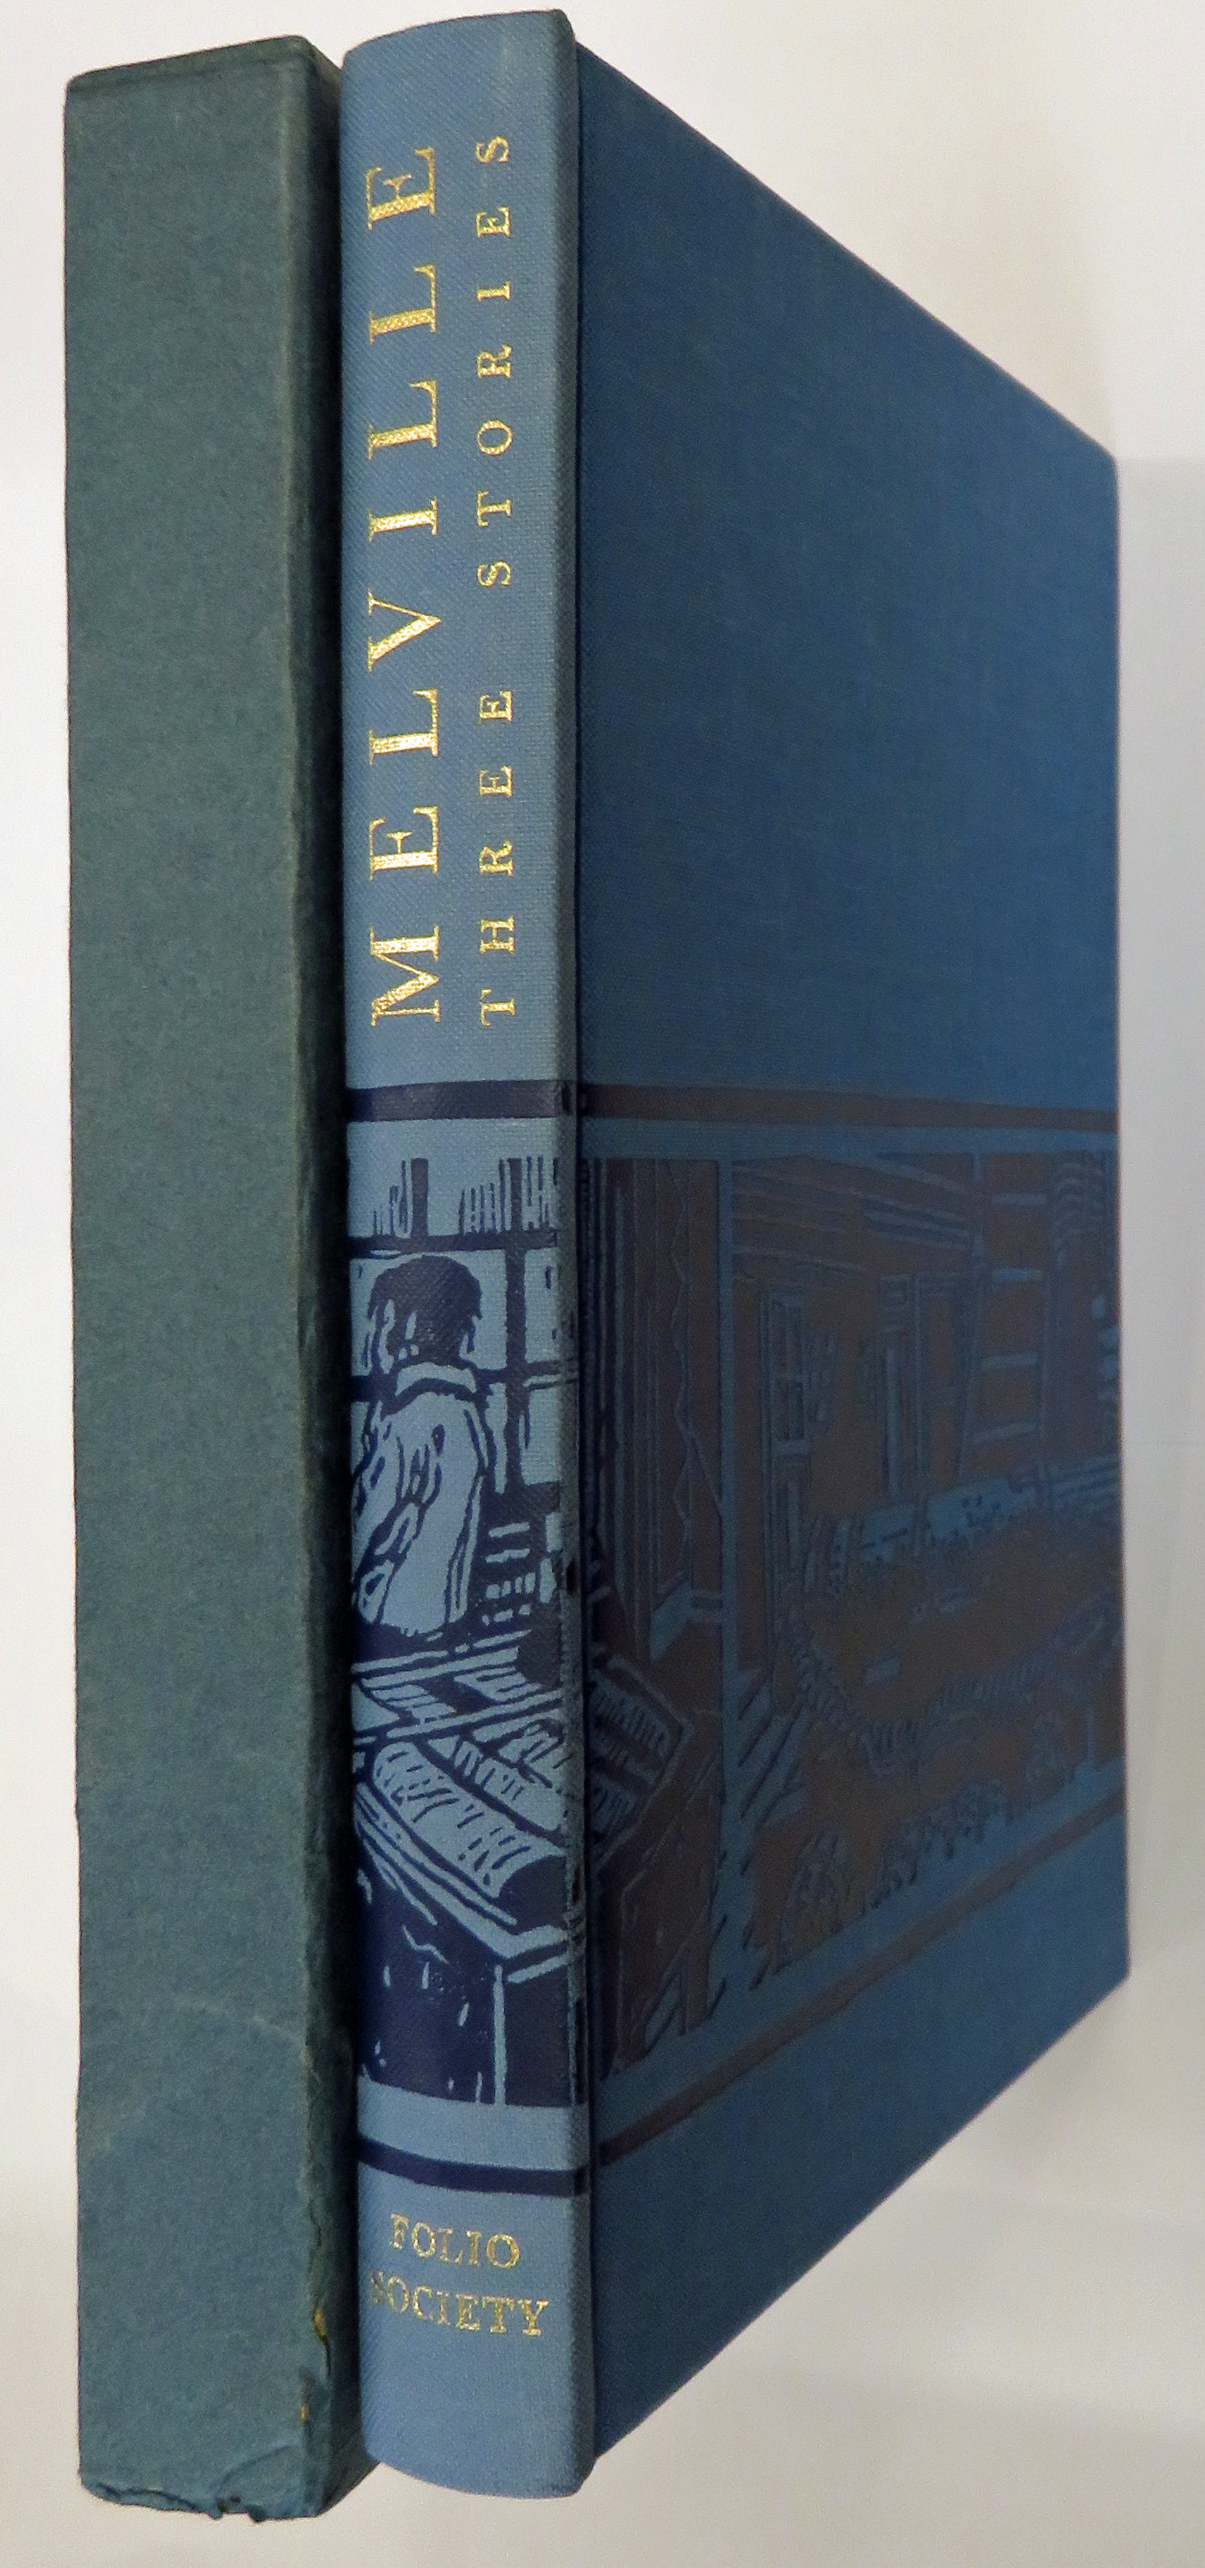 Three Stories by Herman Melville, Bartleboy, Benito Cereno and Billy Budd 